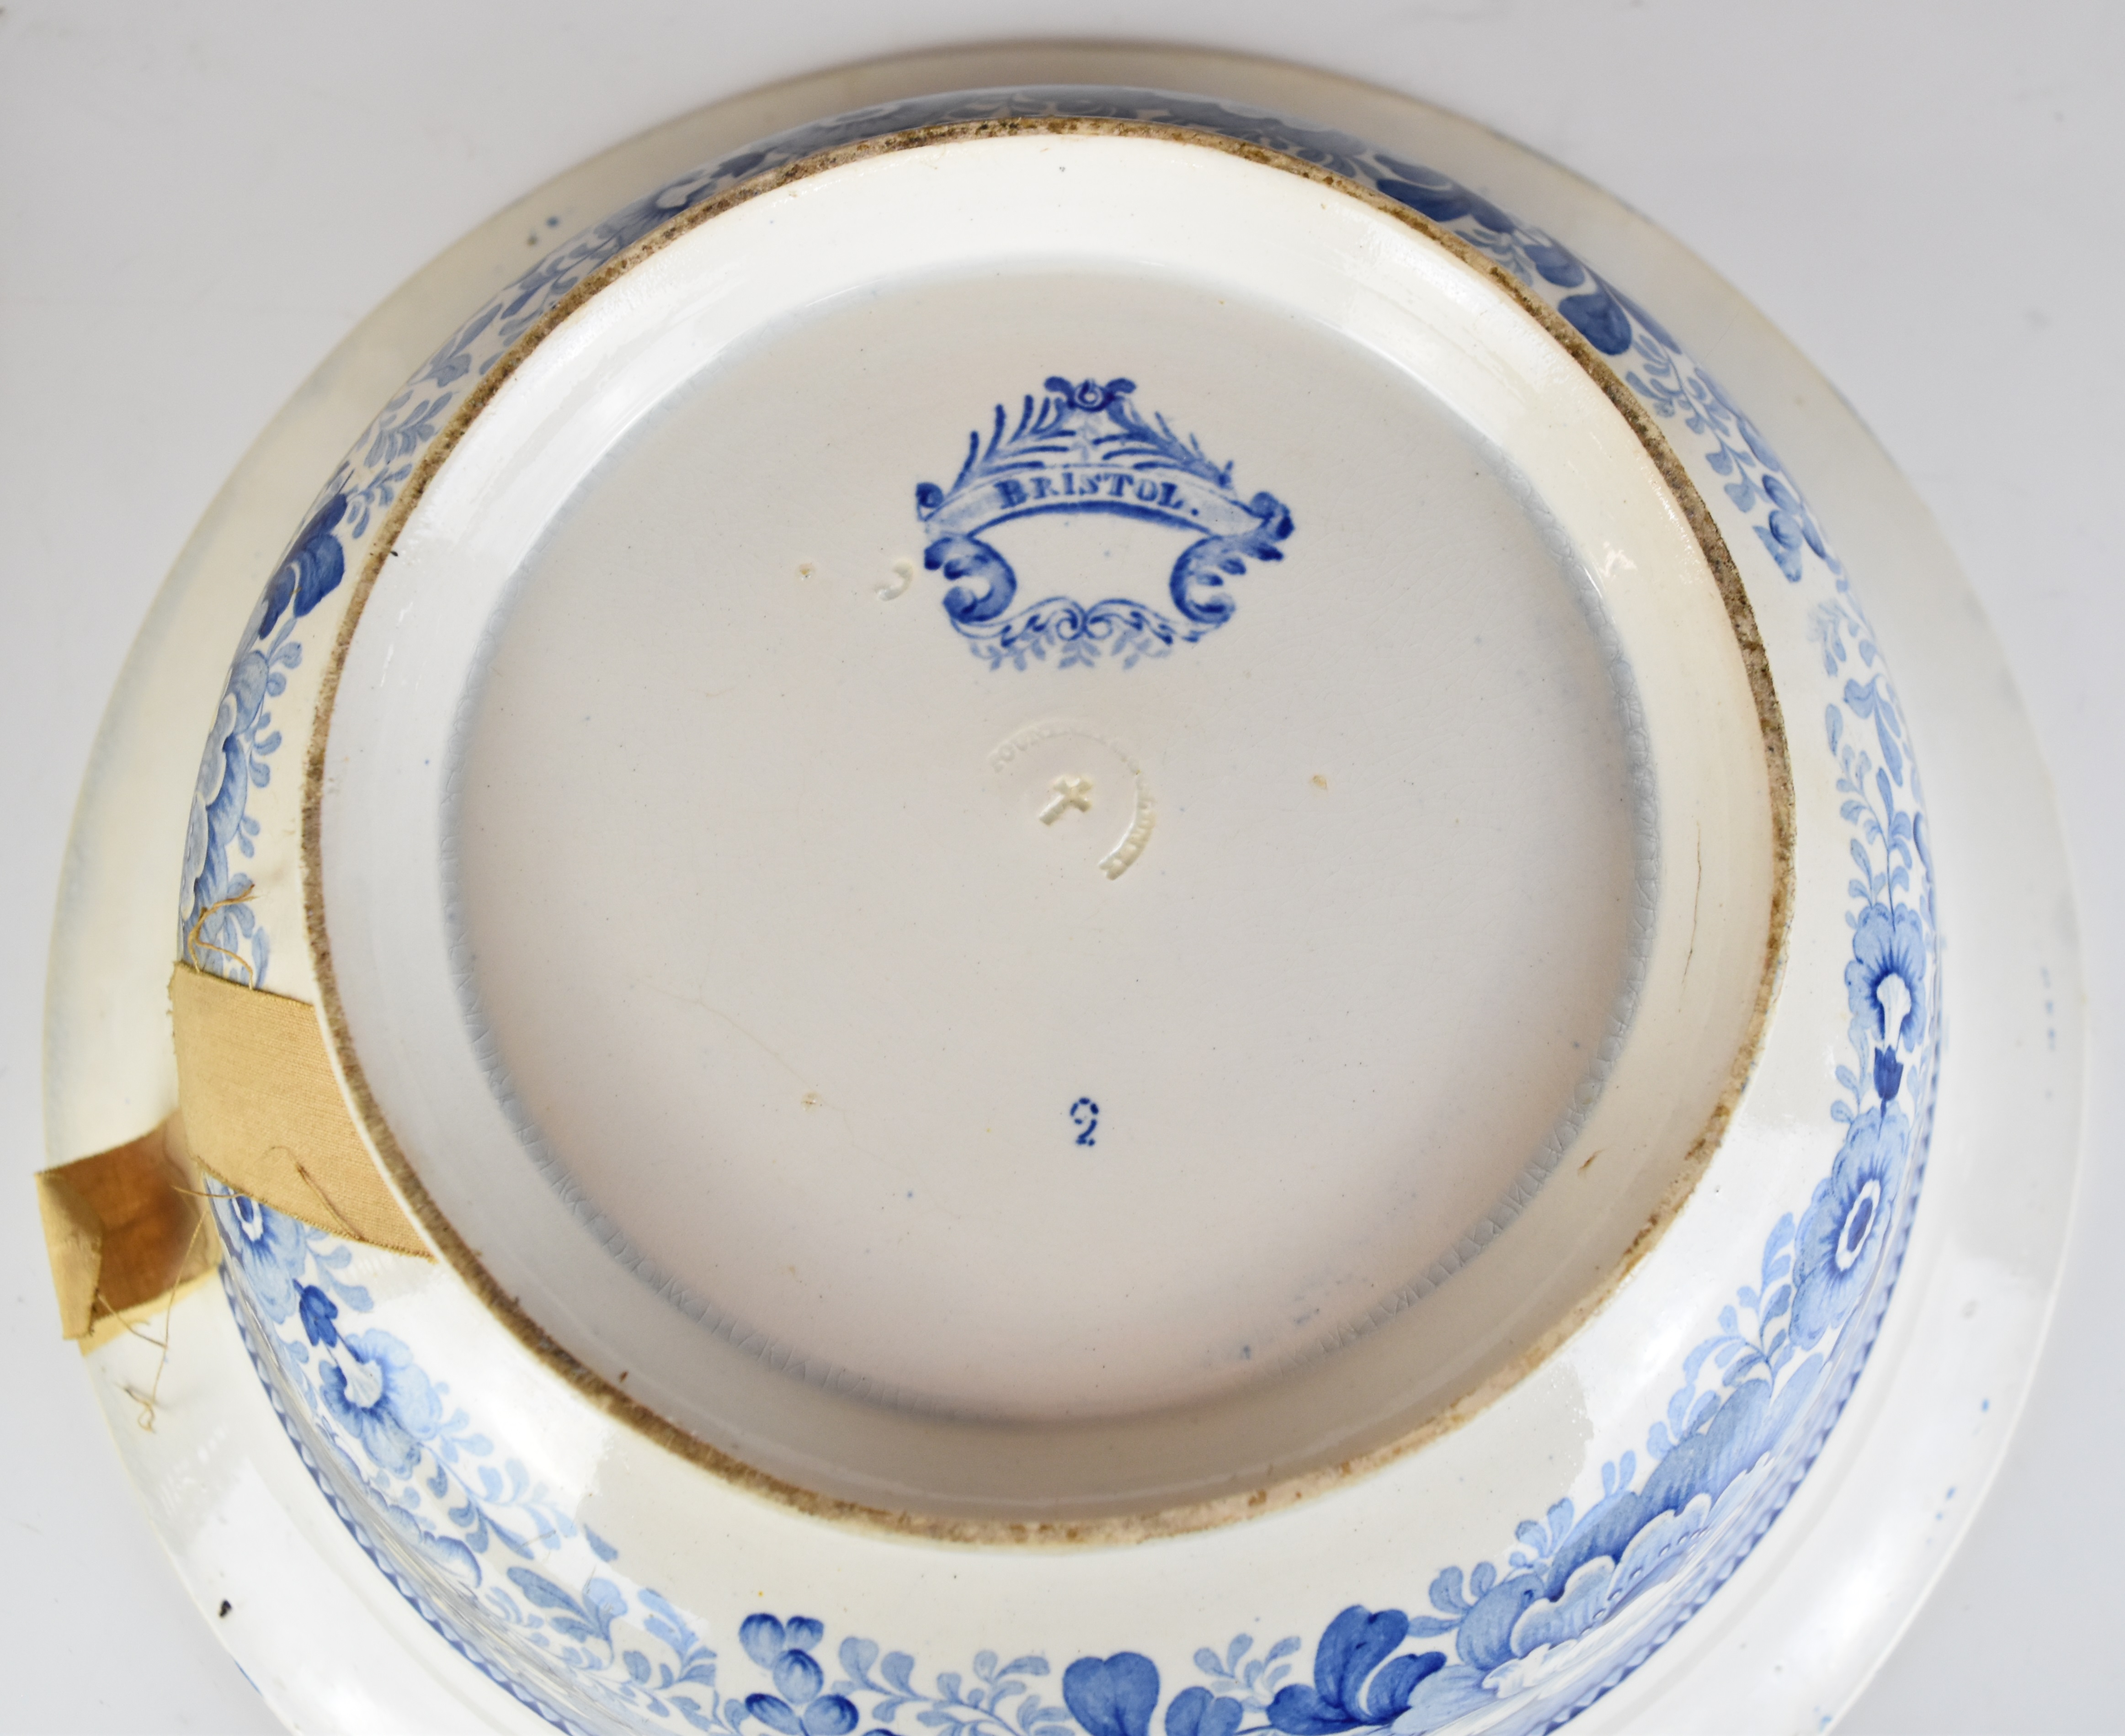 19thC blue and white transfer printed ware with named scenes of Bristol, Clifton and River Avon, - Image 10 of 10